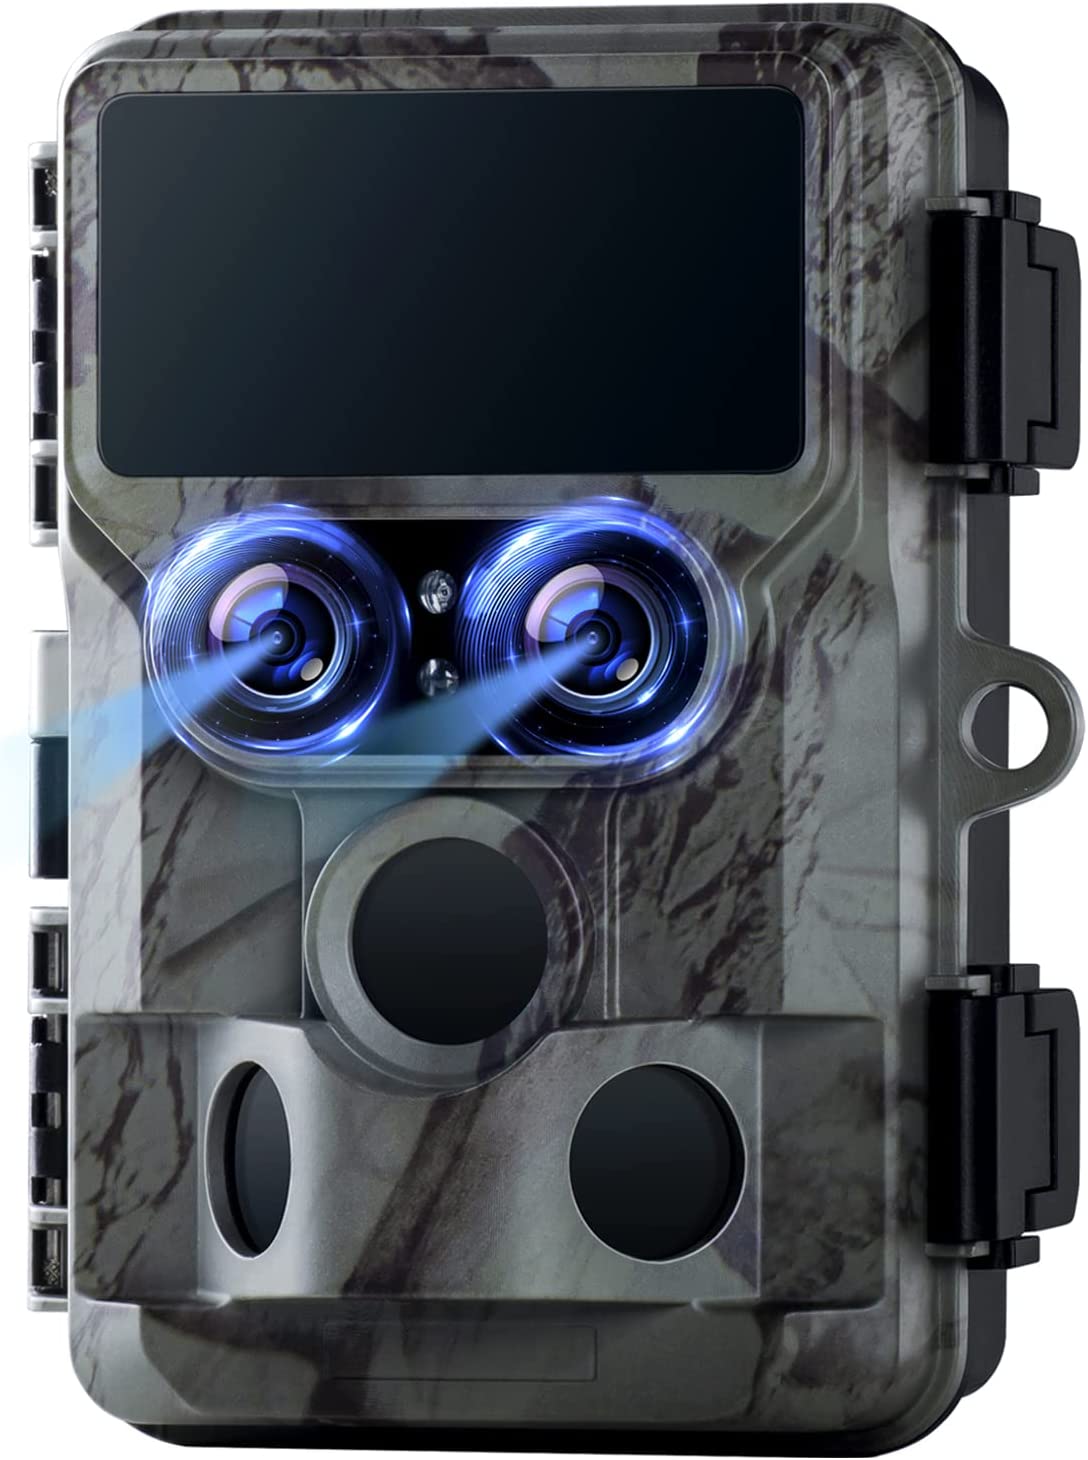 CAMPARK WiFi Trail Camera Native 4K 60MP 30FPS Bluetooth Game Hunting Deer Camera with Starlight Night Vision Dual Lens IMX458 Sensors 0.1s Motion Activated IP66 Waterproof for Wildlife Monitoring